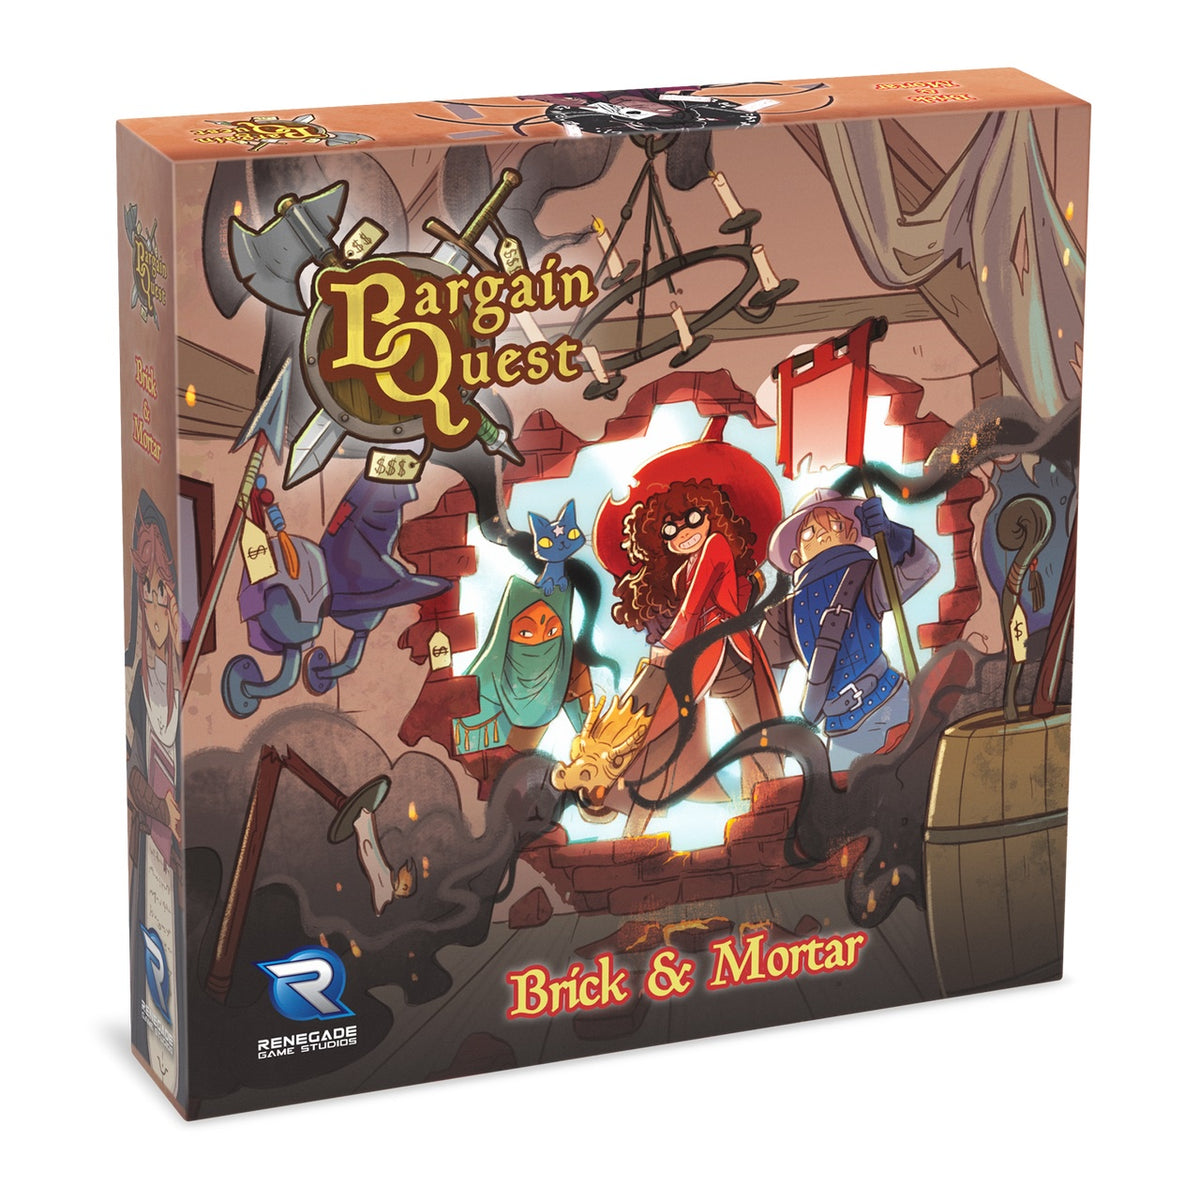 Bargain Quest Brick and Mortar Expansion